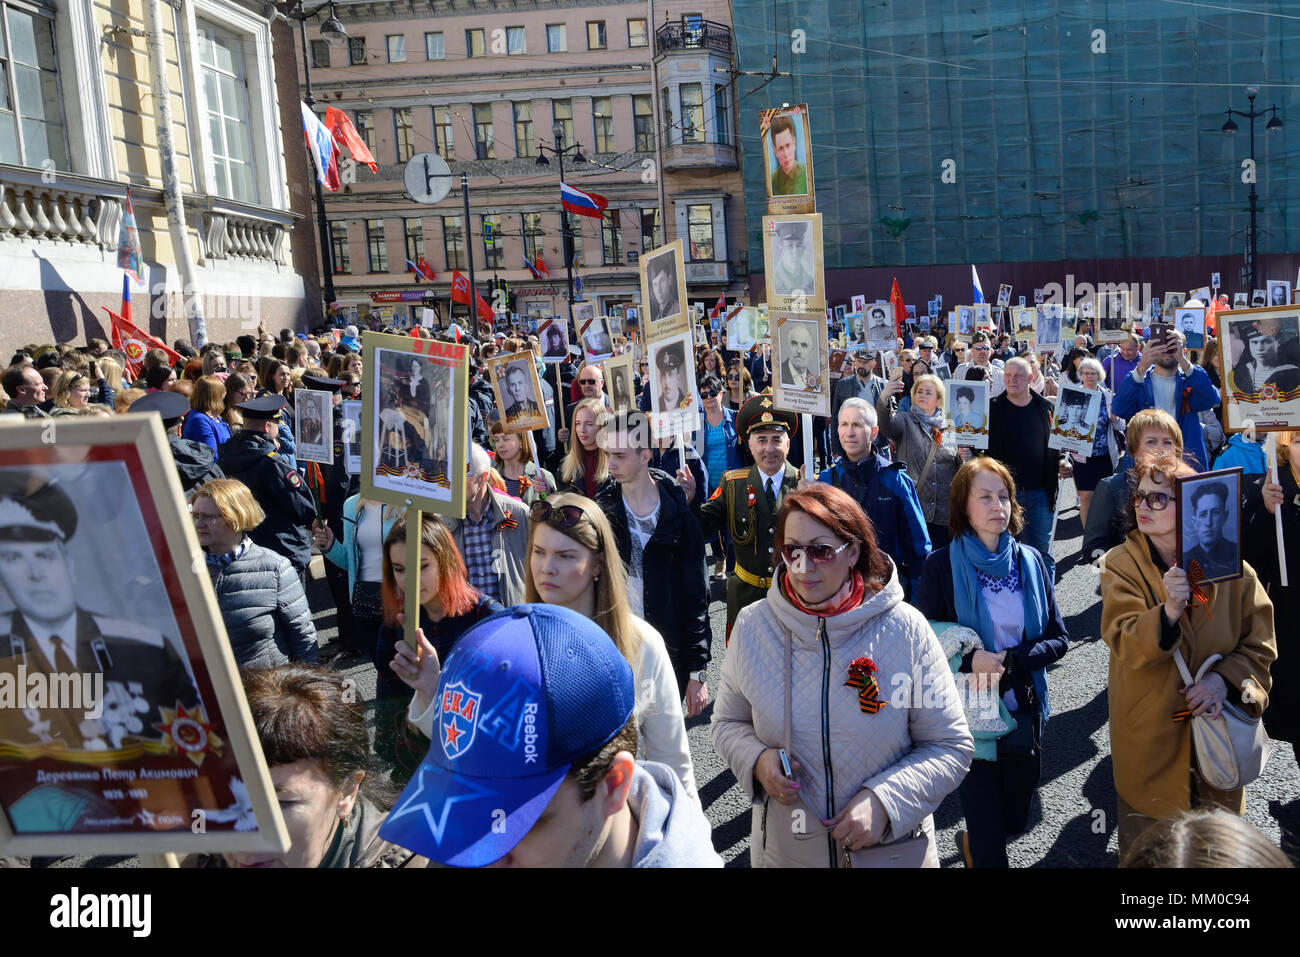 Immortal regiment - people carry banners with a photograph of their warrior ancestors, Victory Day, Nevsky Prospect, St. Petersburg, Russia Stock Photo